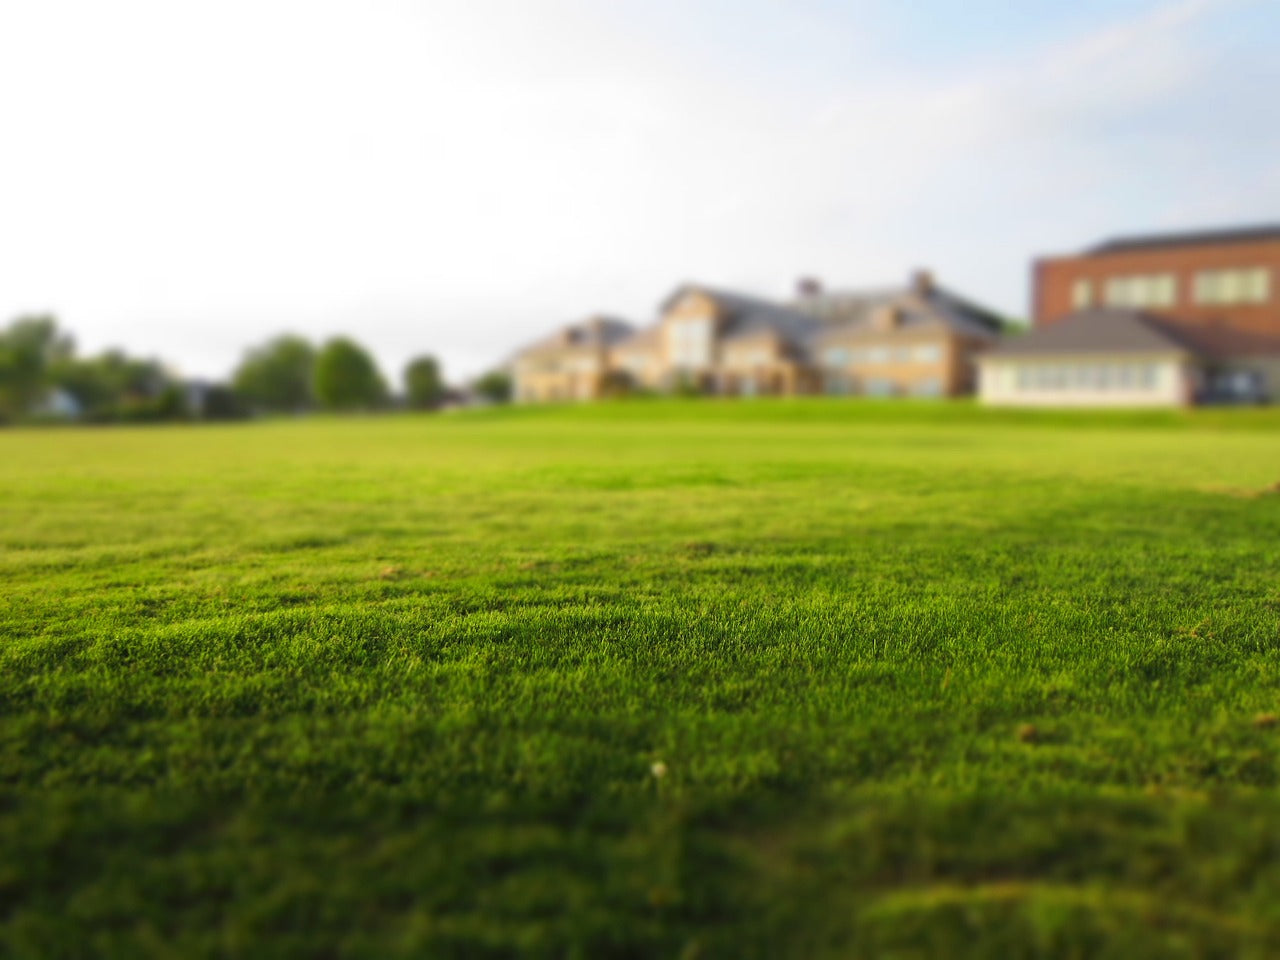 How Excessive Rainwater Can Lead to Nutrient Deficient Lawns